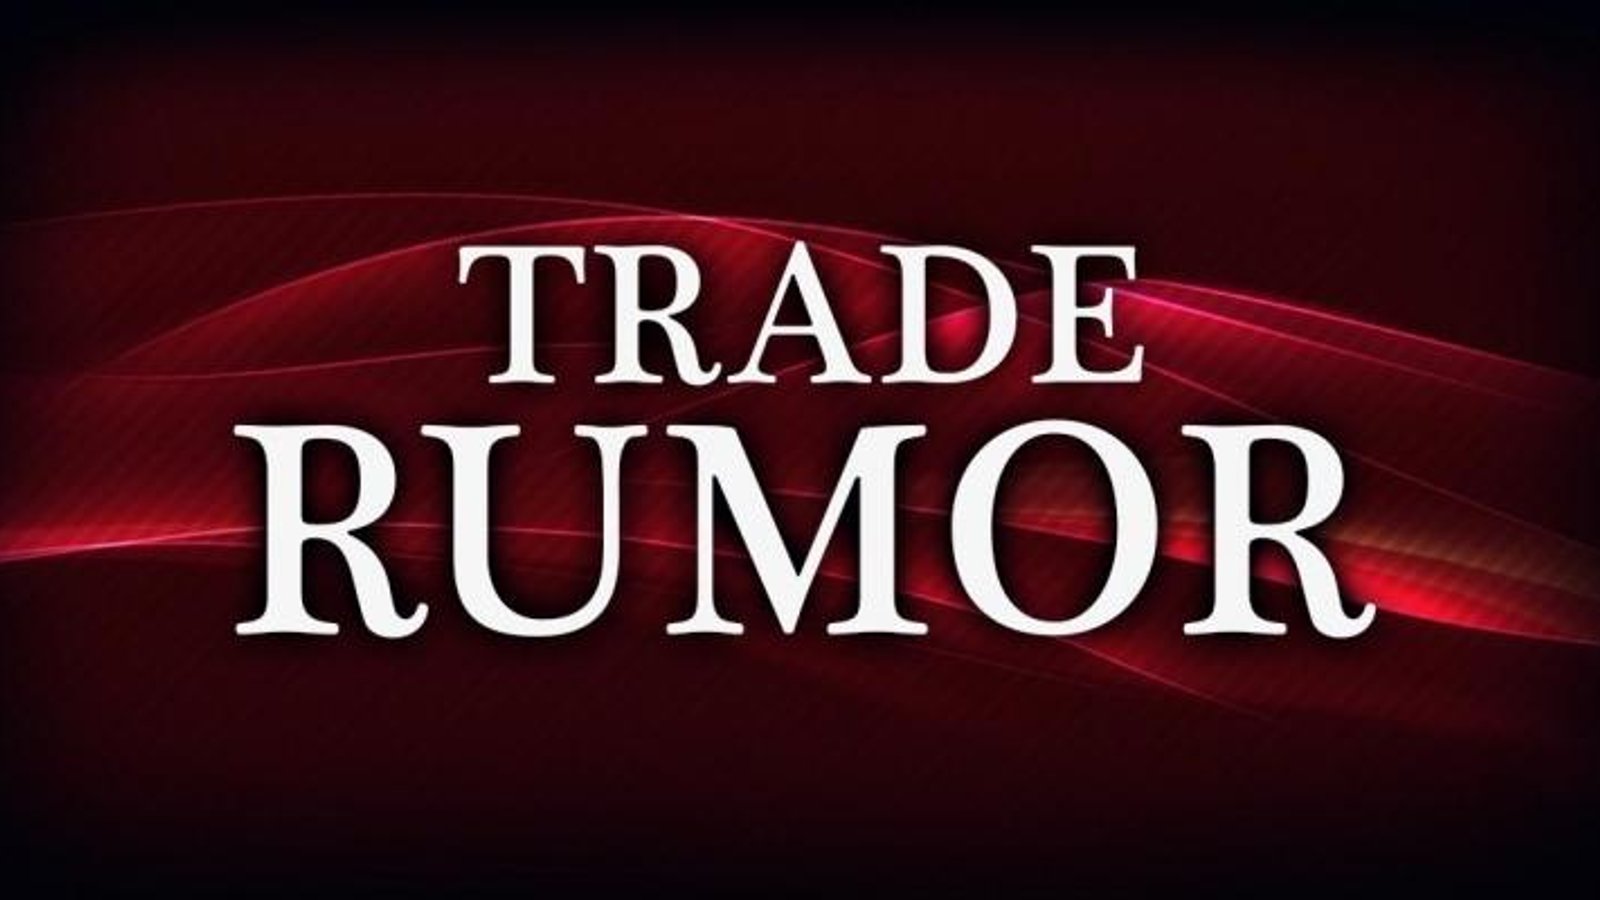 Rumors of a major trade in the next 48 hours.